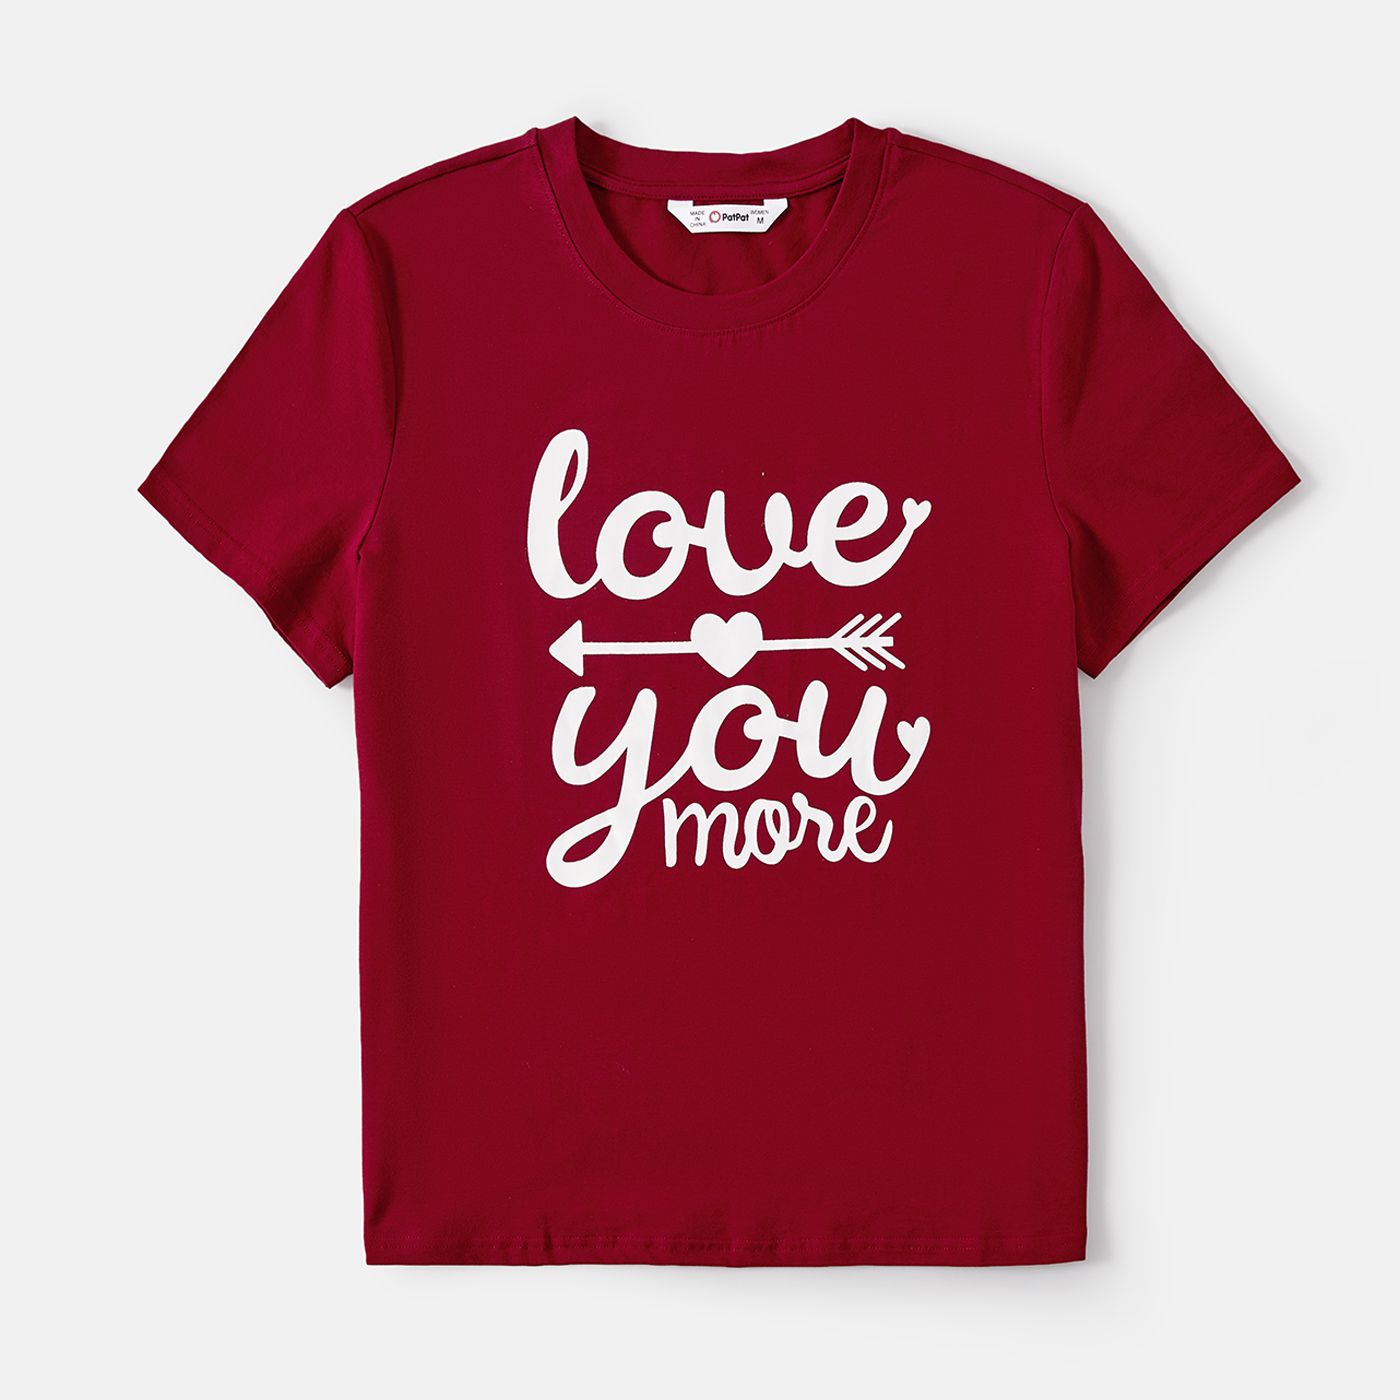 Family Matching Cotton Short-sleeve Letter Print Tee